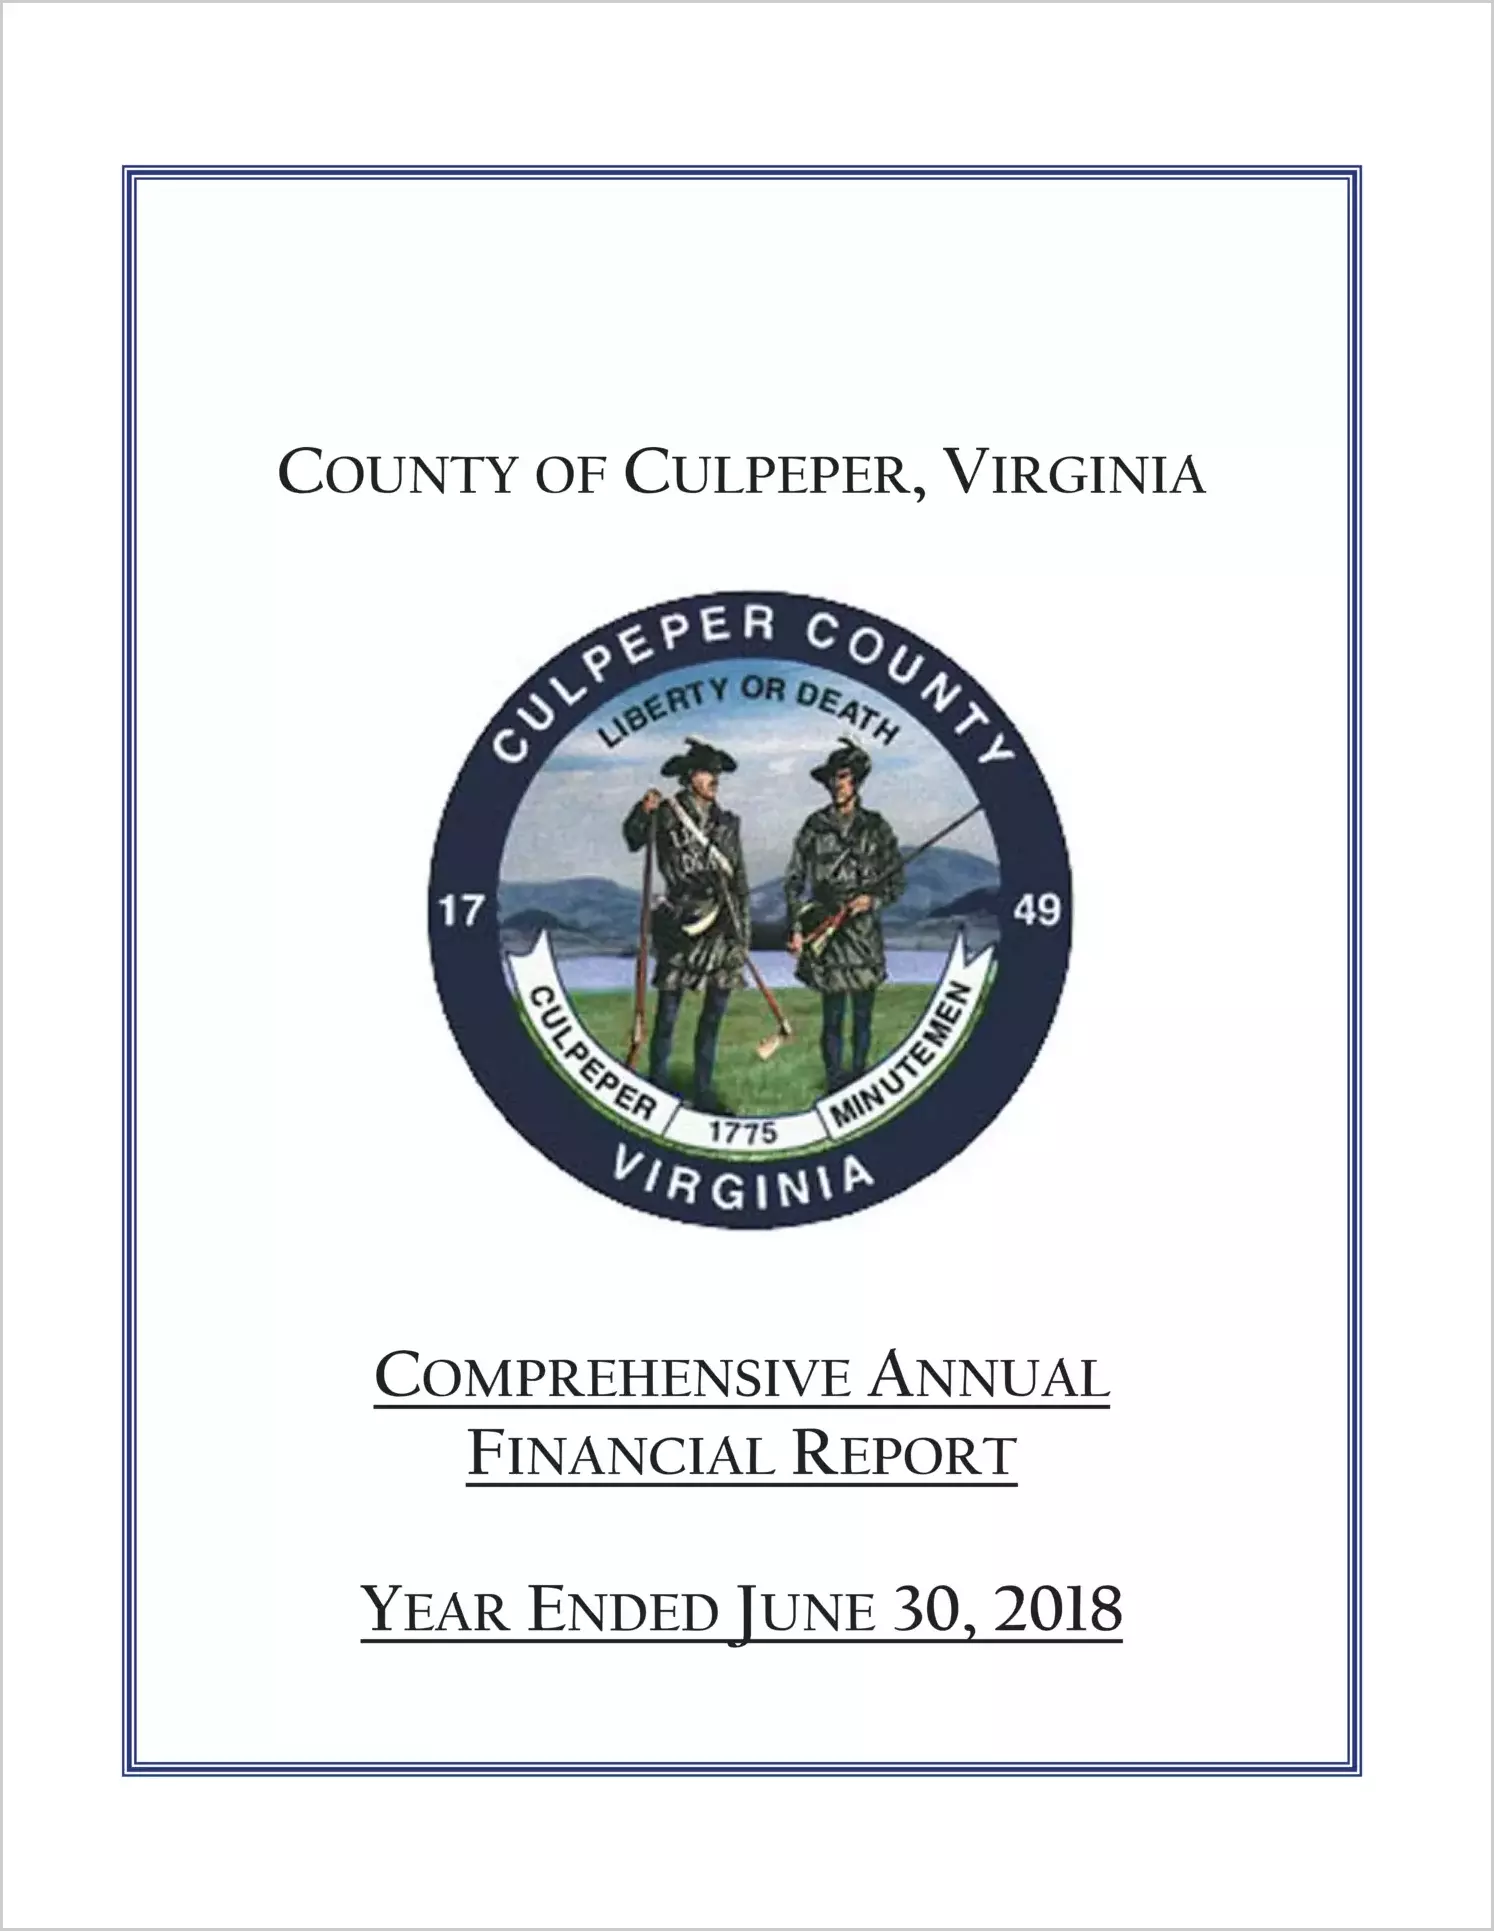 2018 Annual Financial Report for County of Culpeper